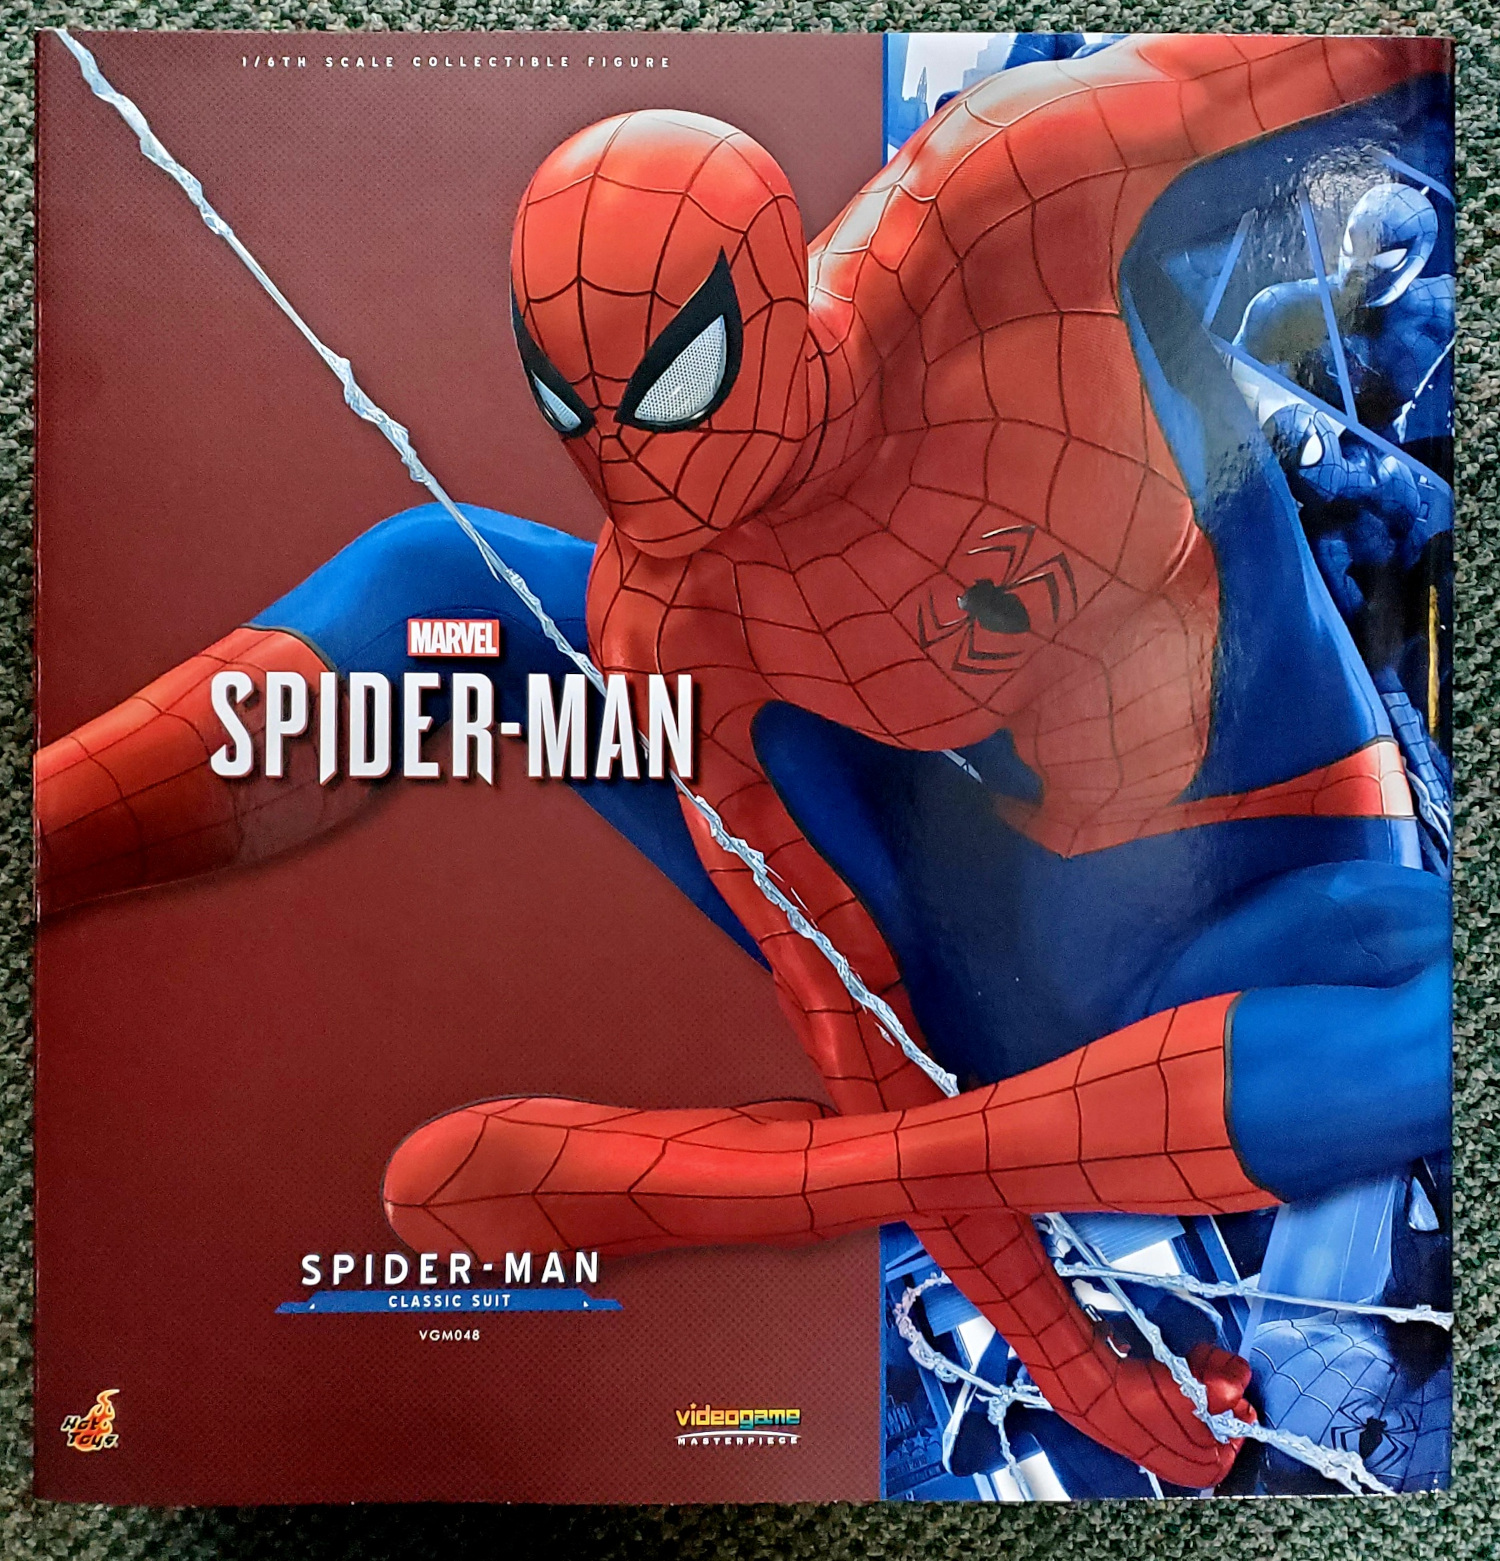 Hot Toys Spider-Man Video Game Classic Suit Spdier-Man 1:6 Scale Figure 1